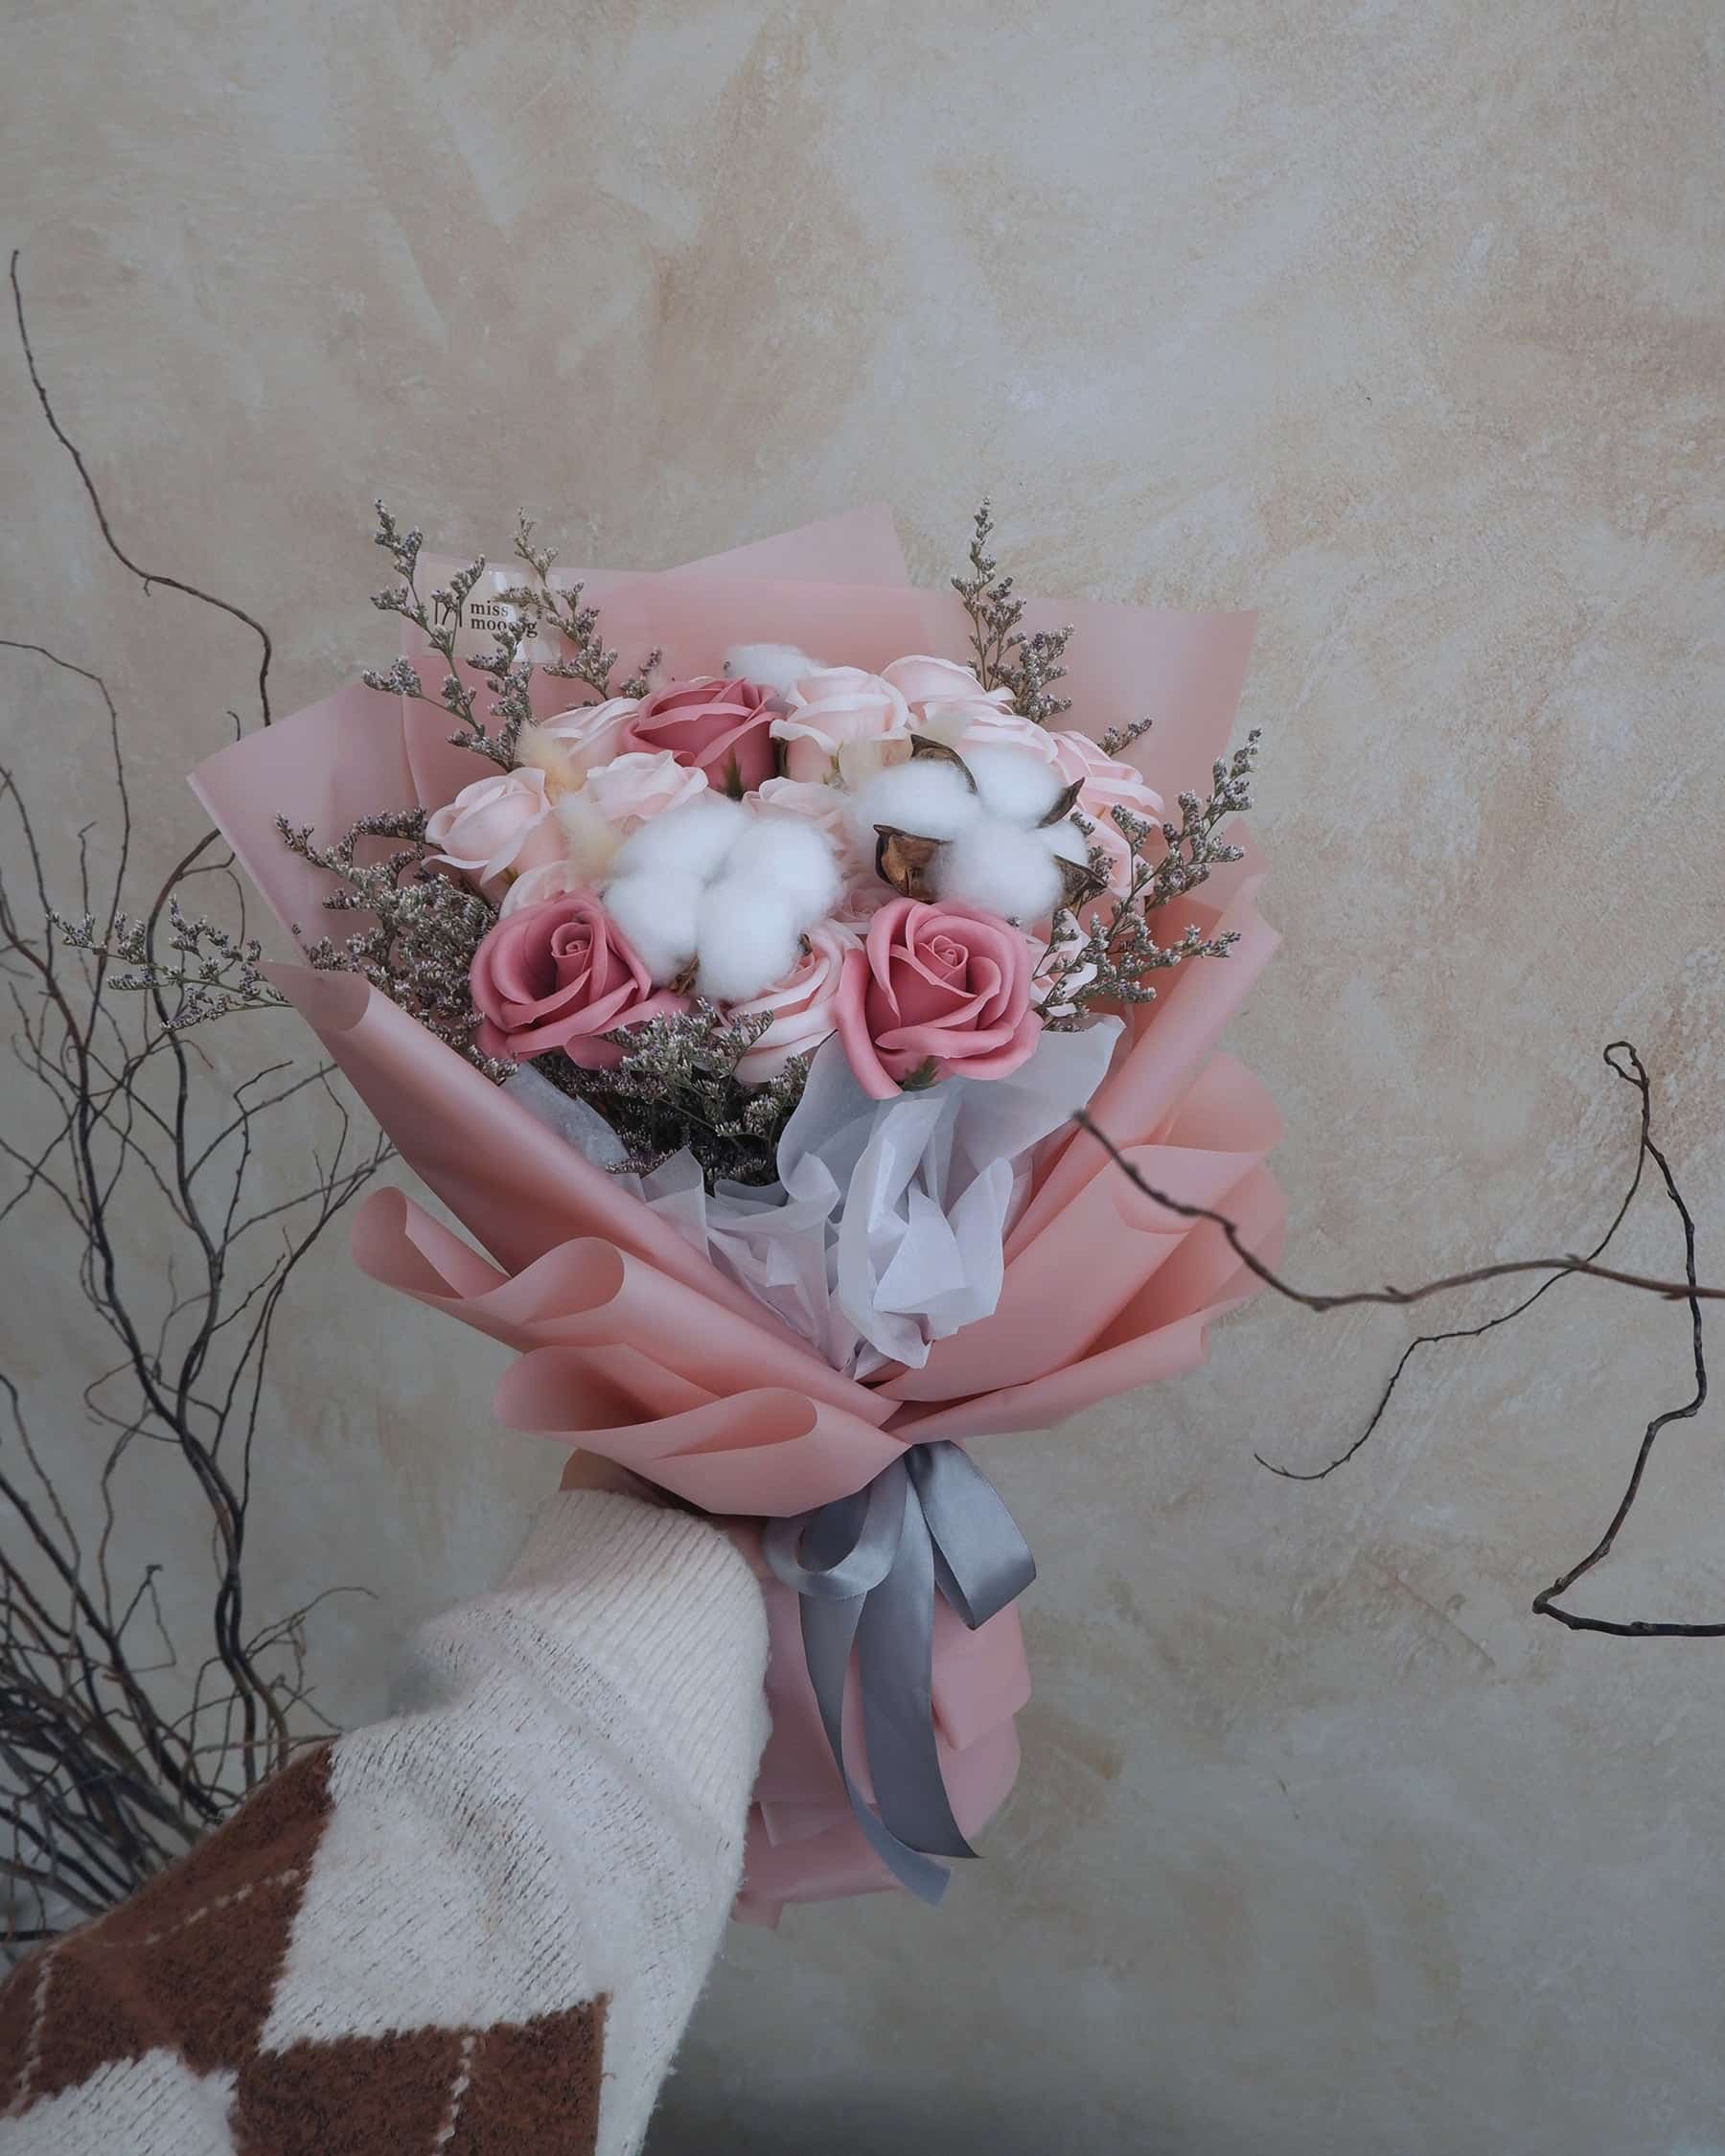 soap roses with cotton flower